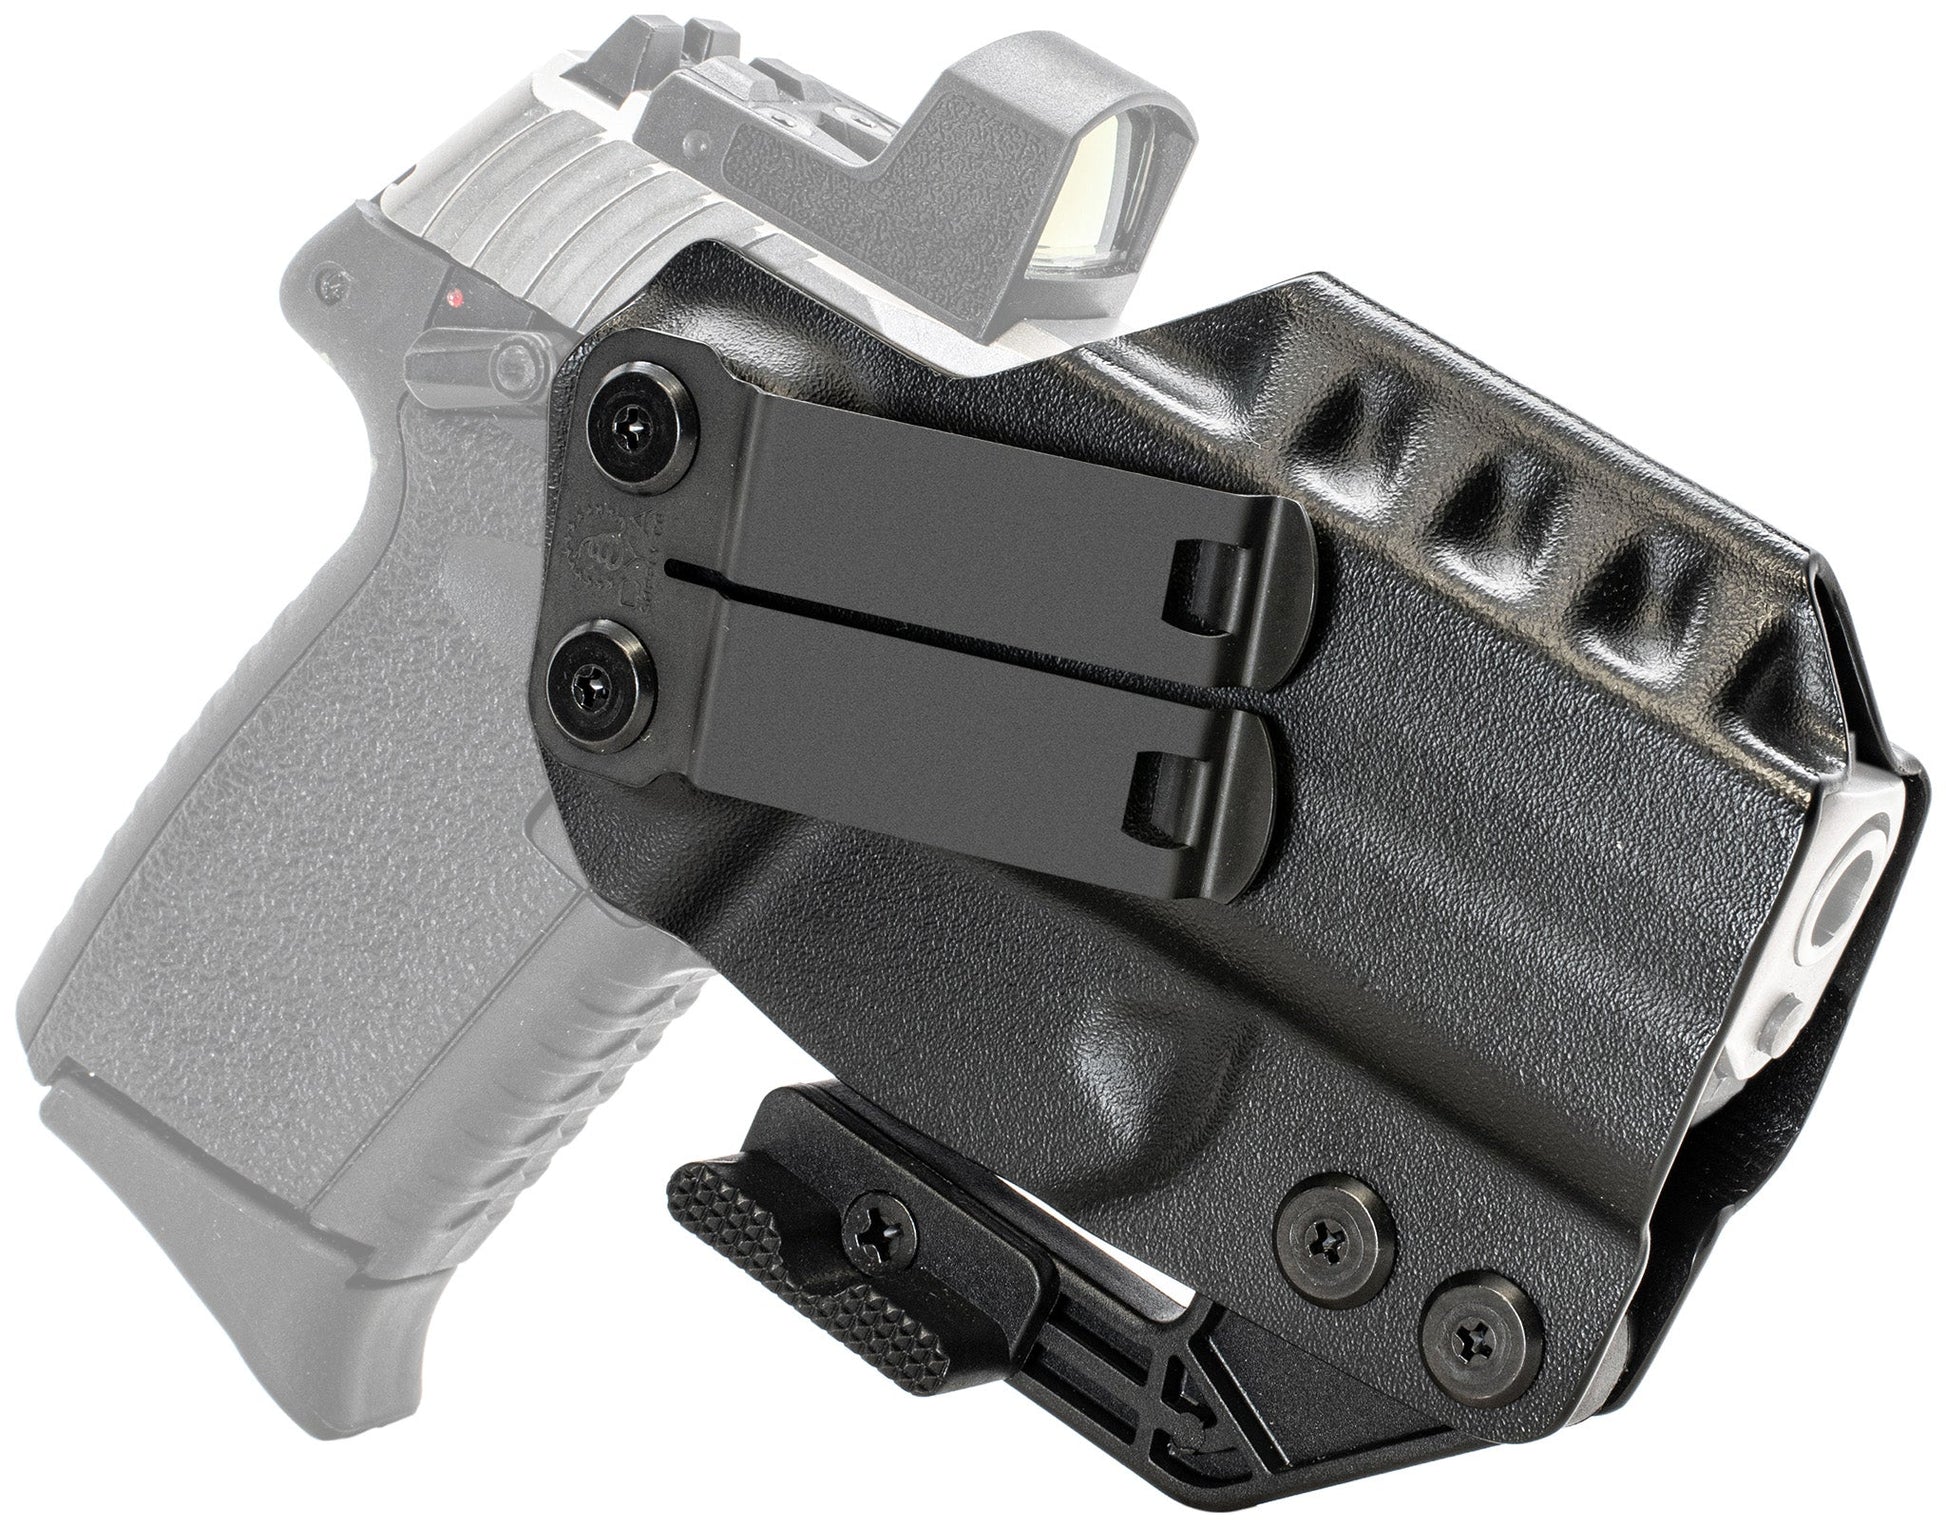 SCCY CPX-2 Gen3 Holster CYA Supply Co.